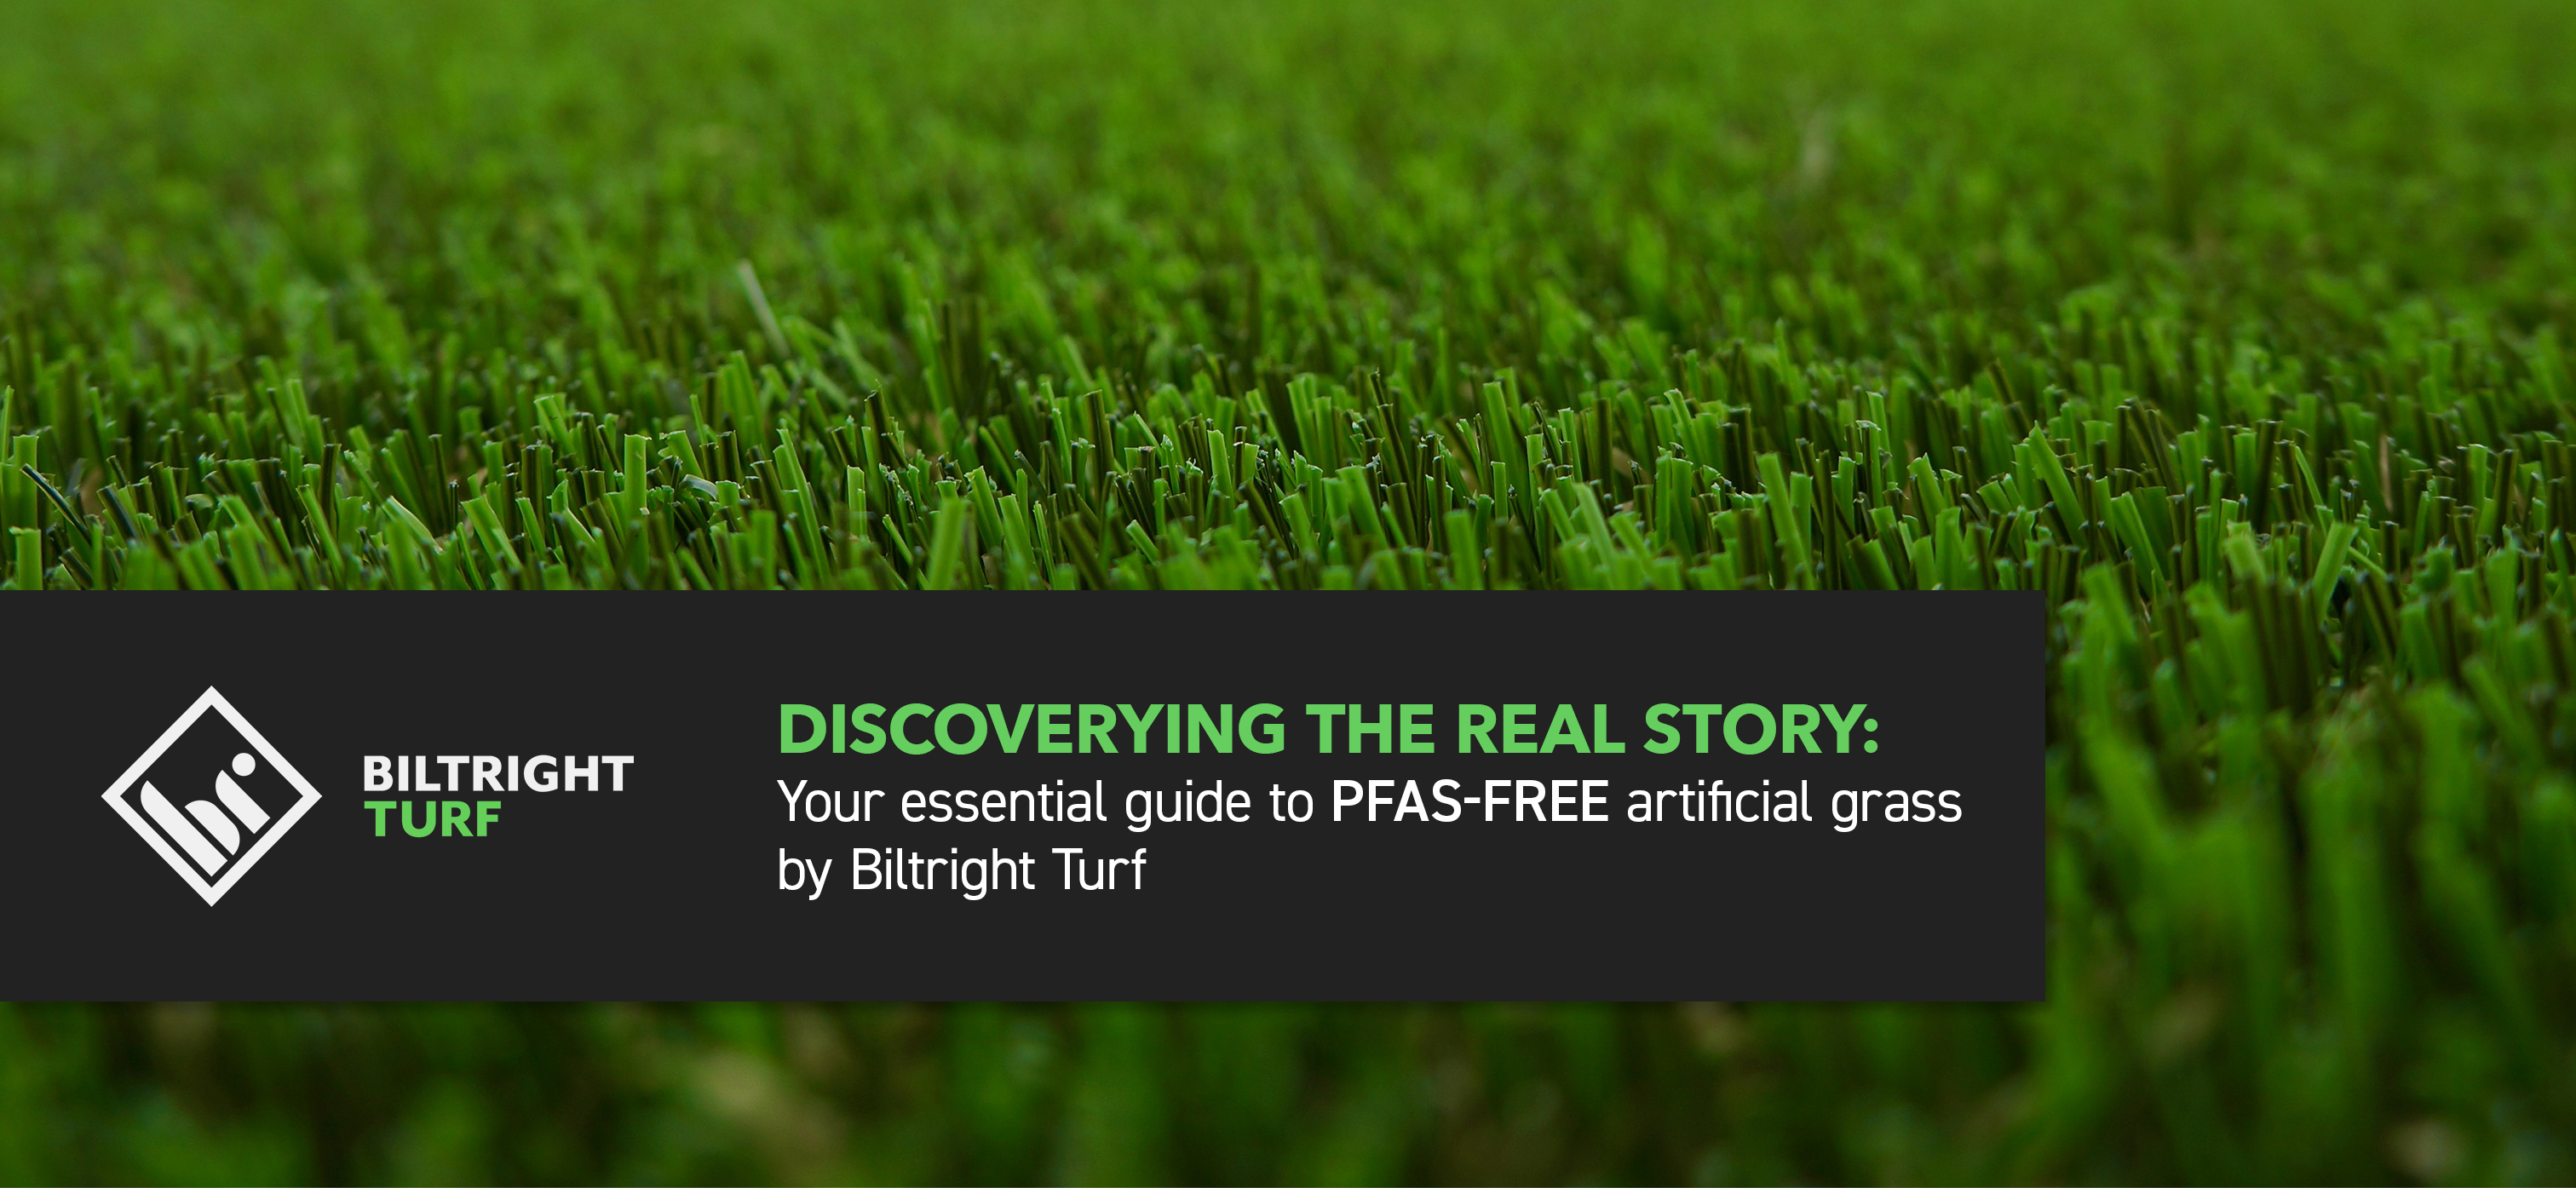 Discovering the Real Story: Your Essential Guide to PFAS-Free Artificial Grass by Biltright Turf